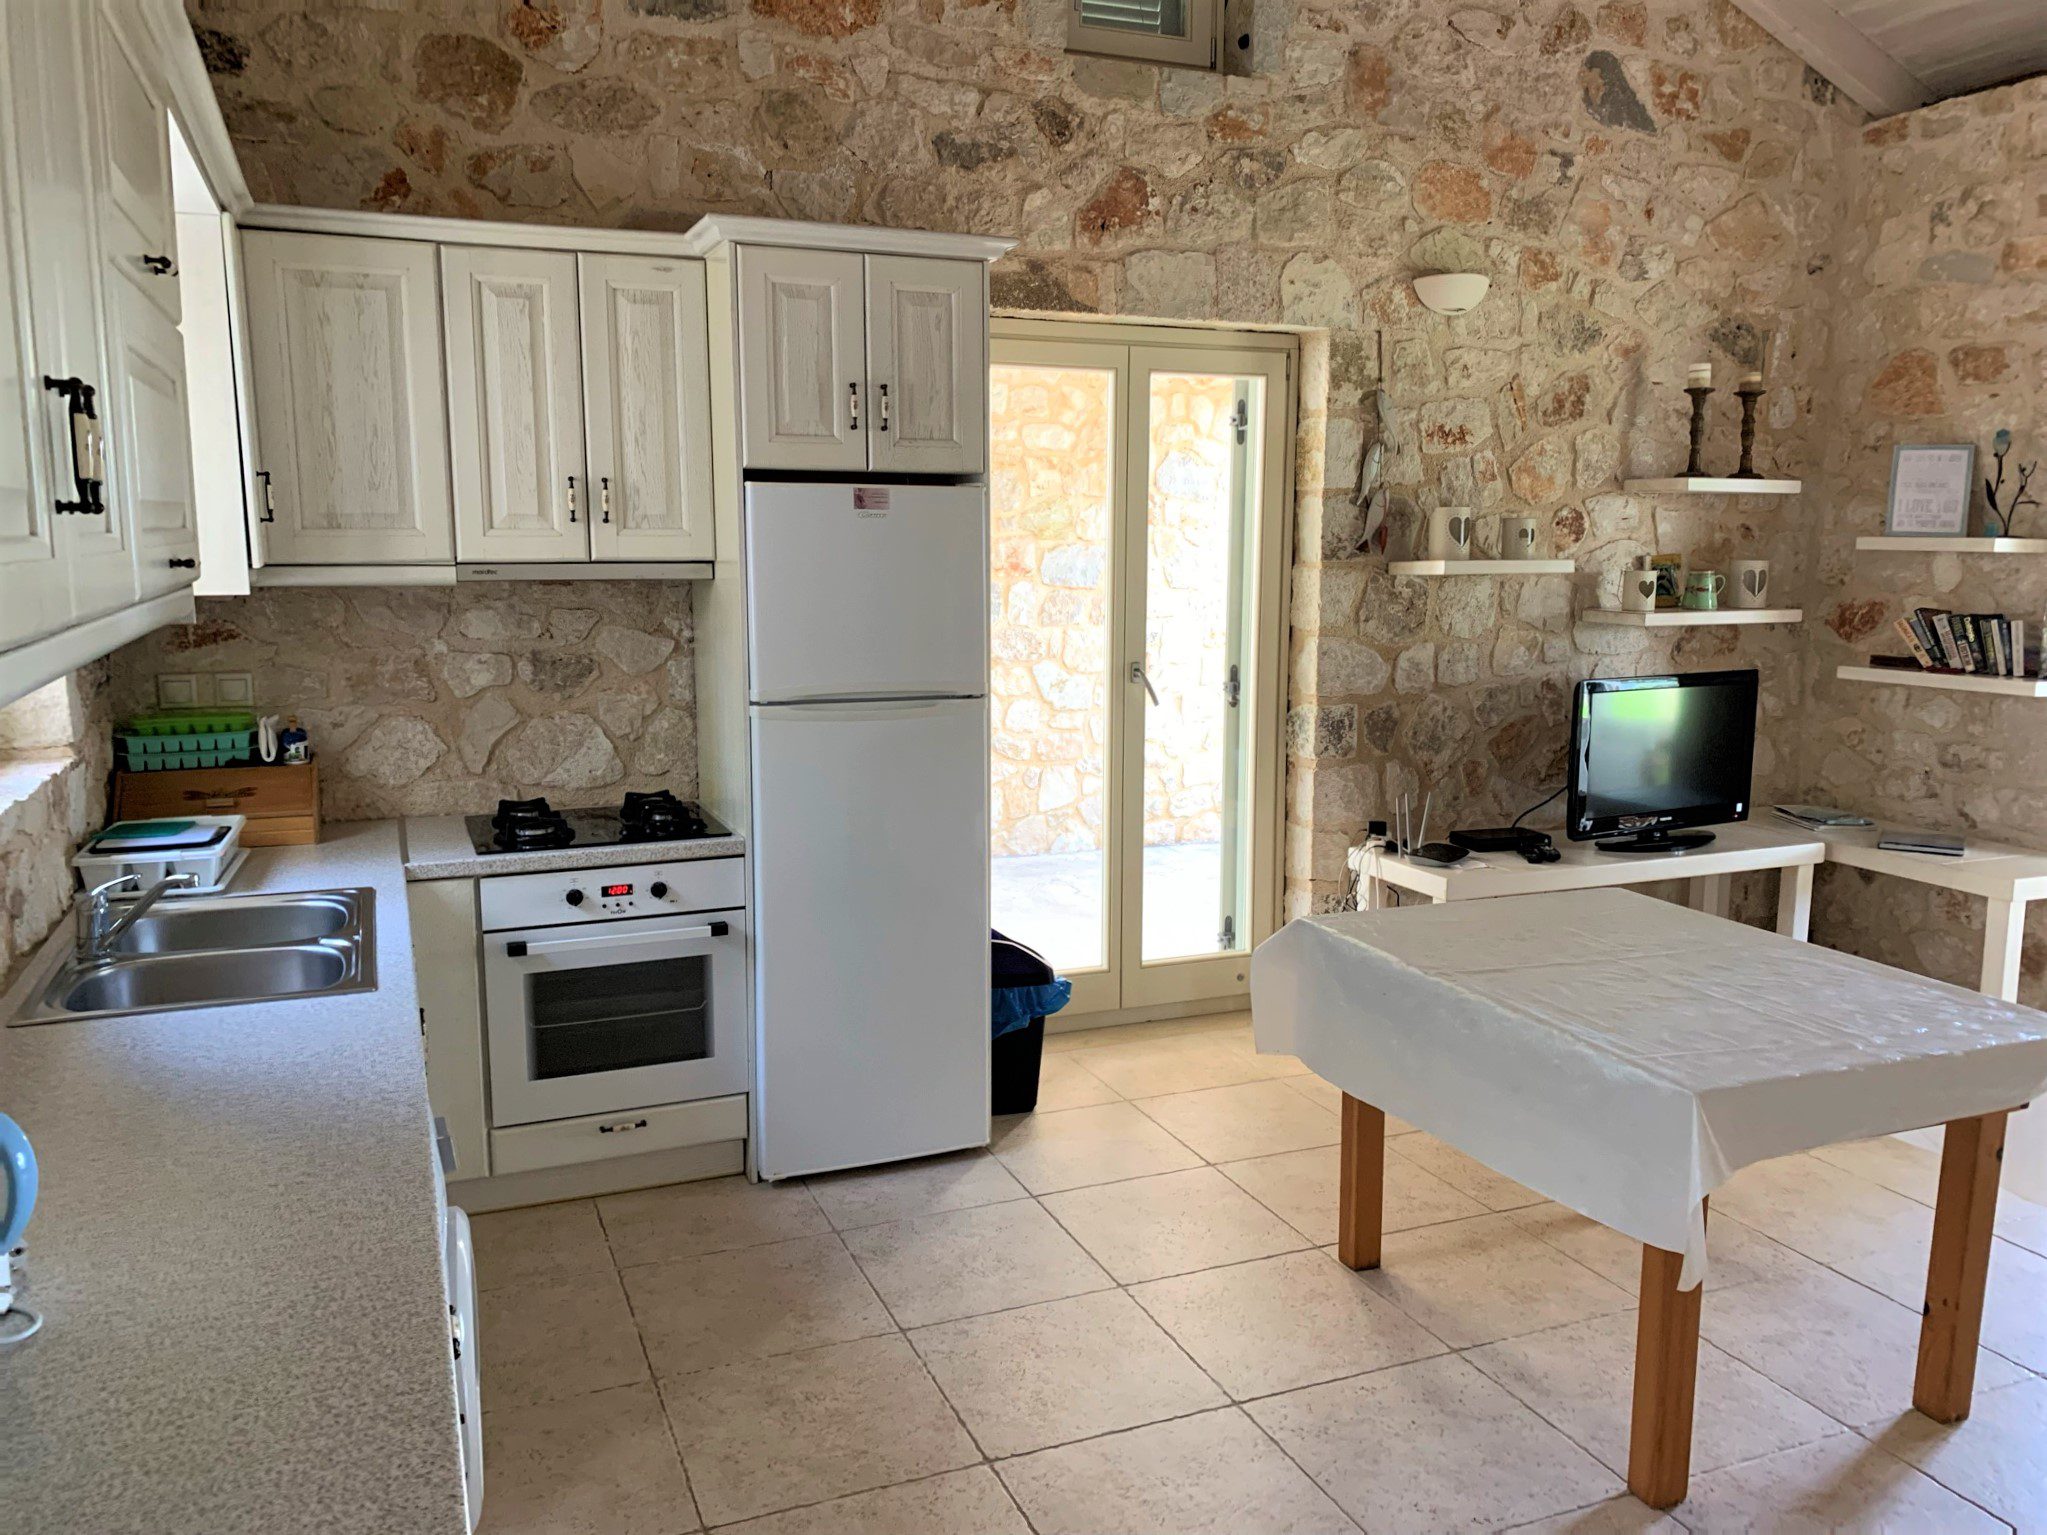 Kitchen area of holiday houses for rent on Ithaca Greece, Stavros